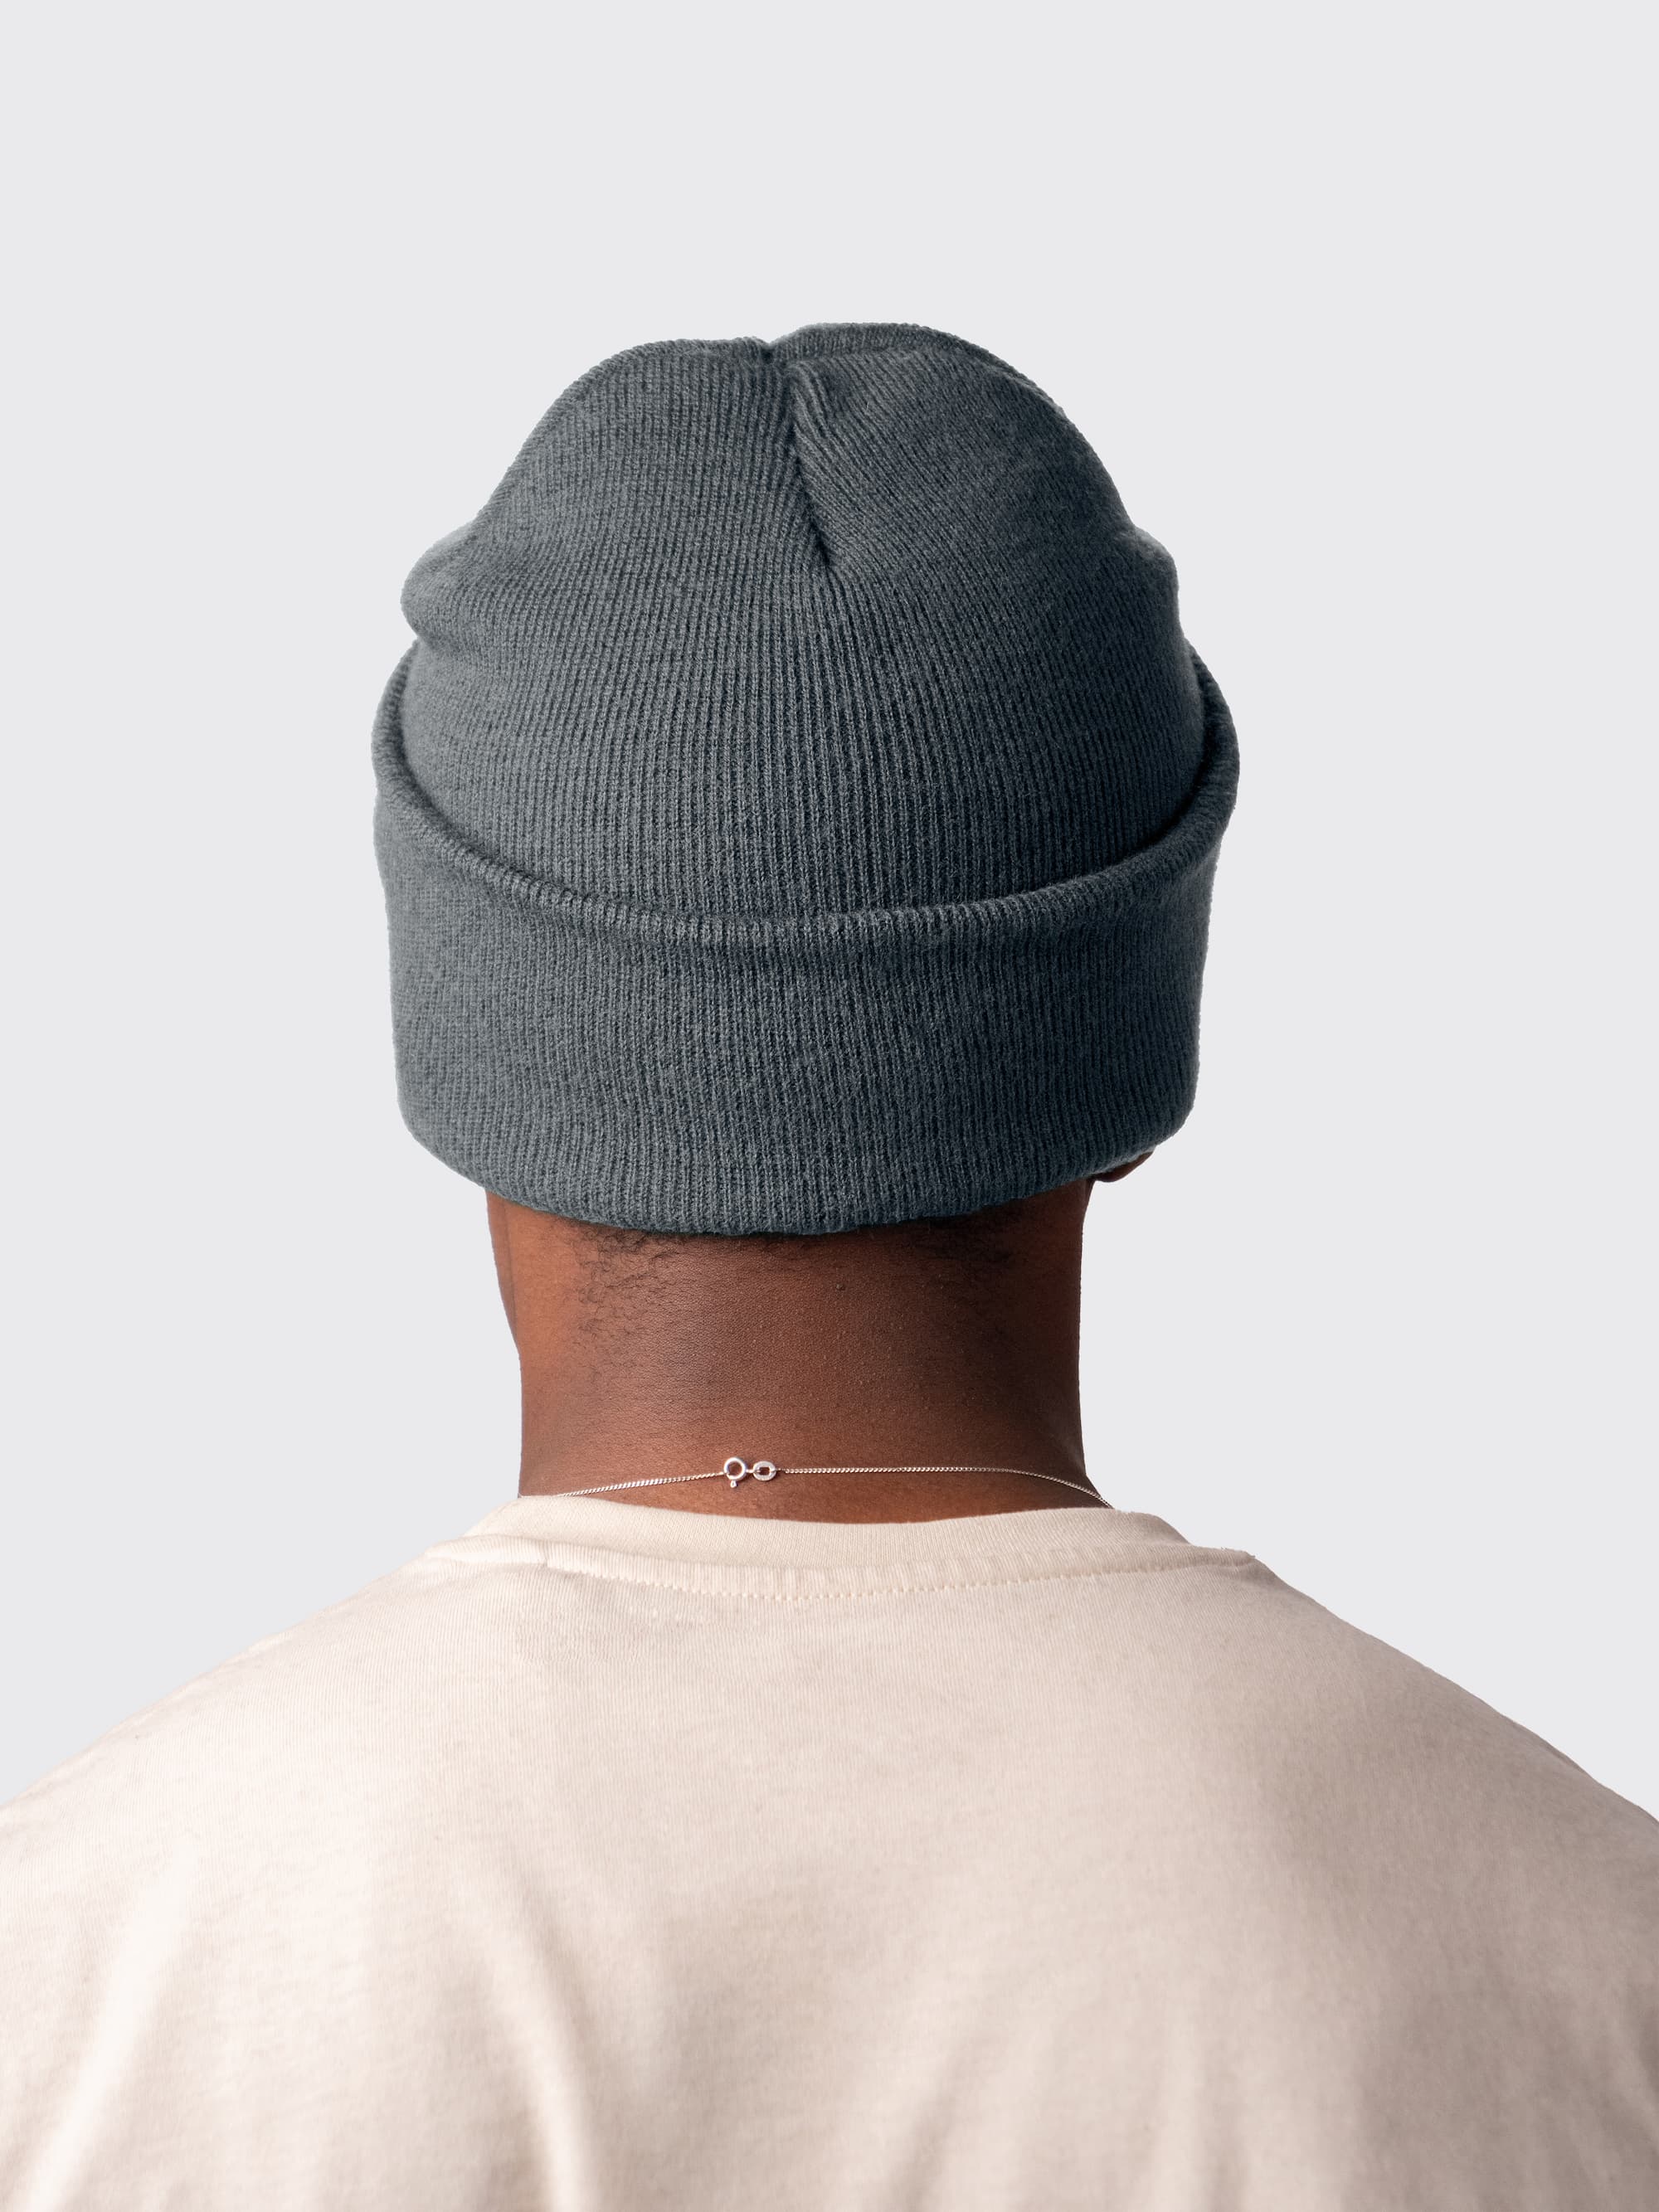  Eco-friendly, grey beanie made from recycled polyester